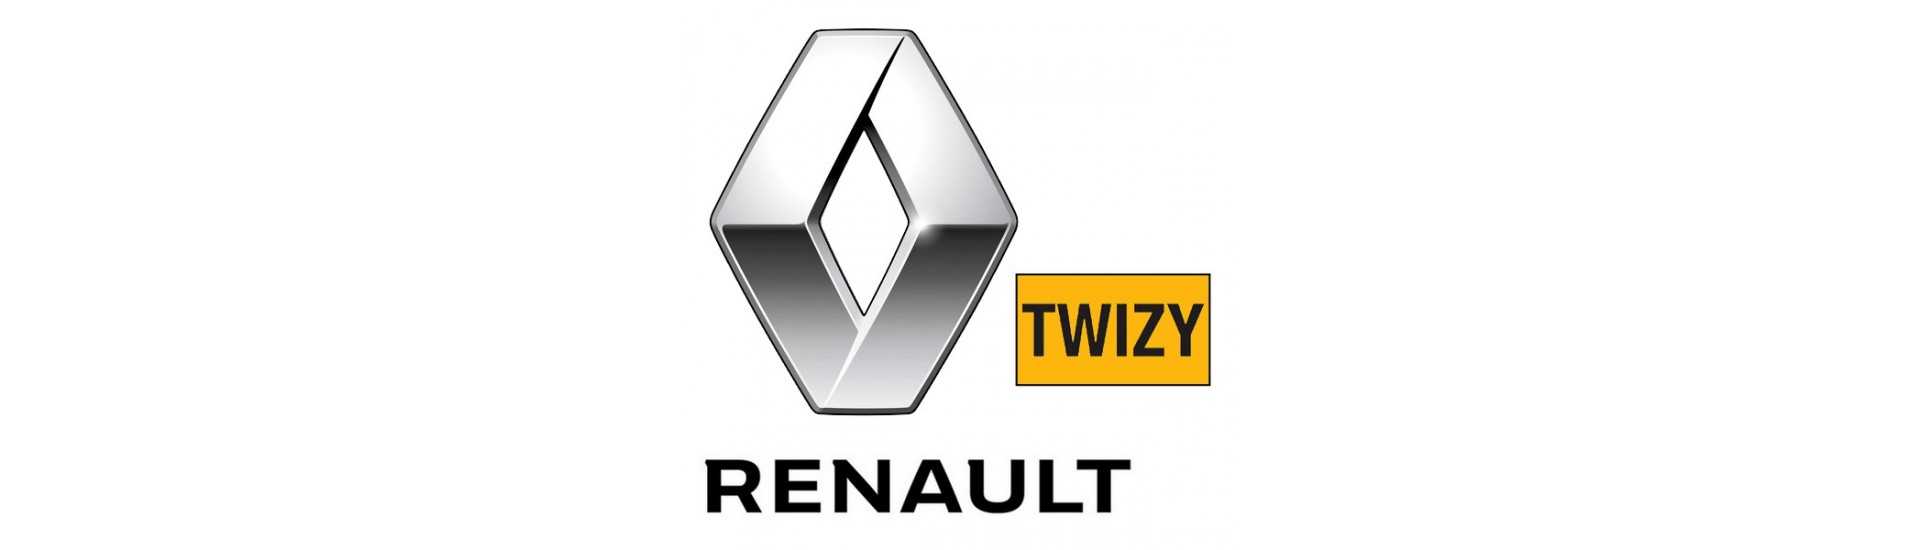 Best price counter for car without a permit Renault Twizy